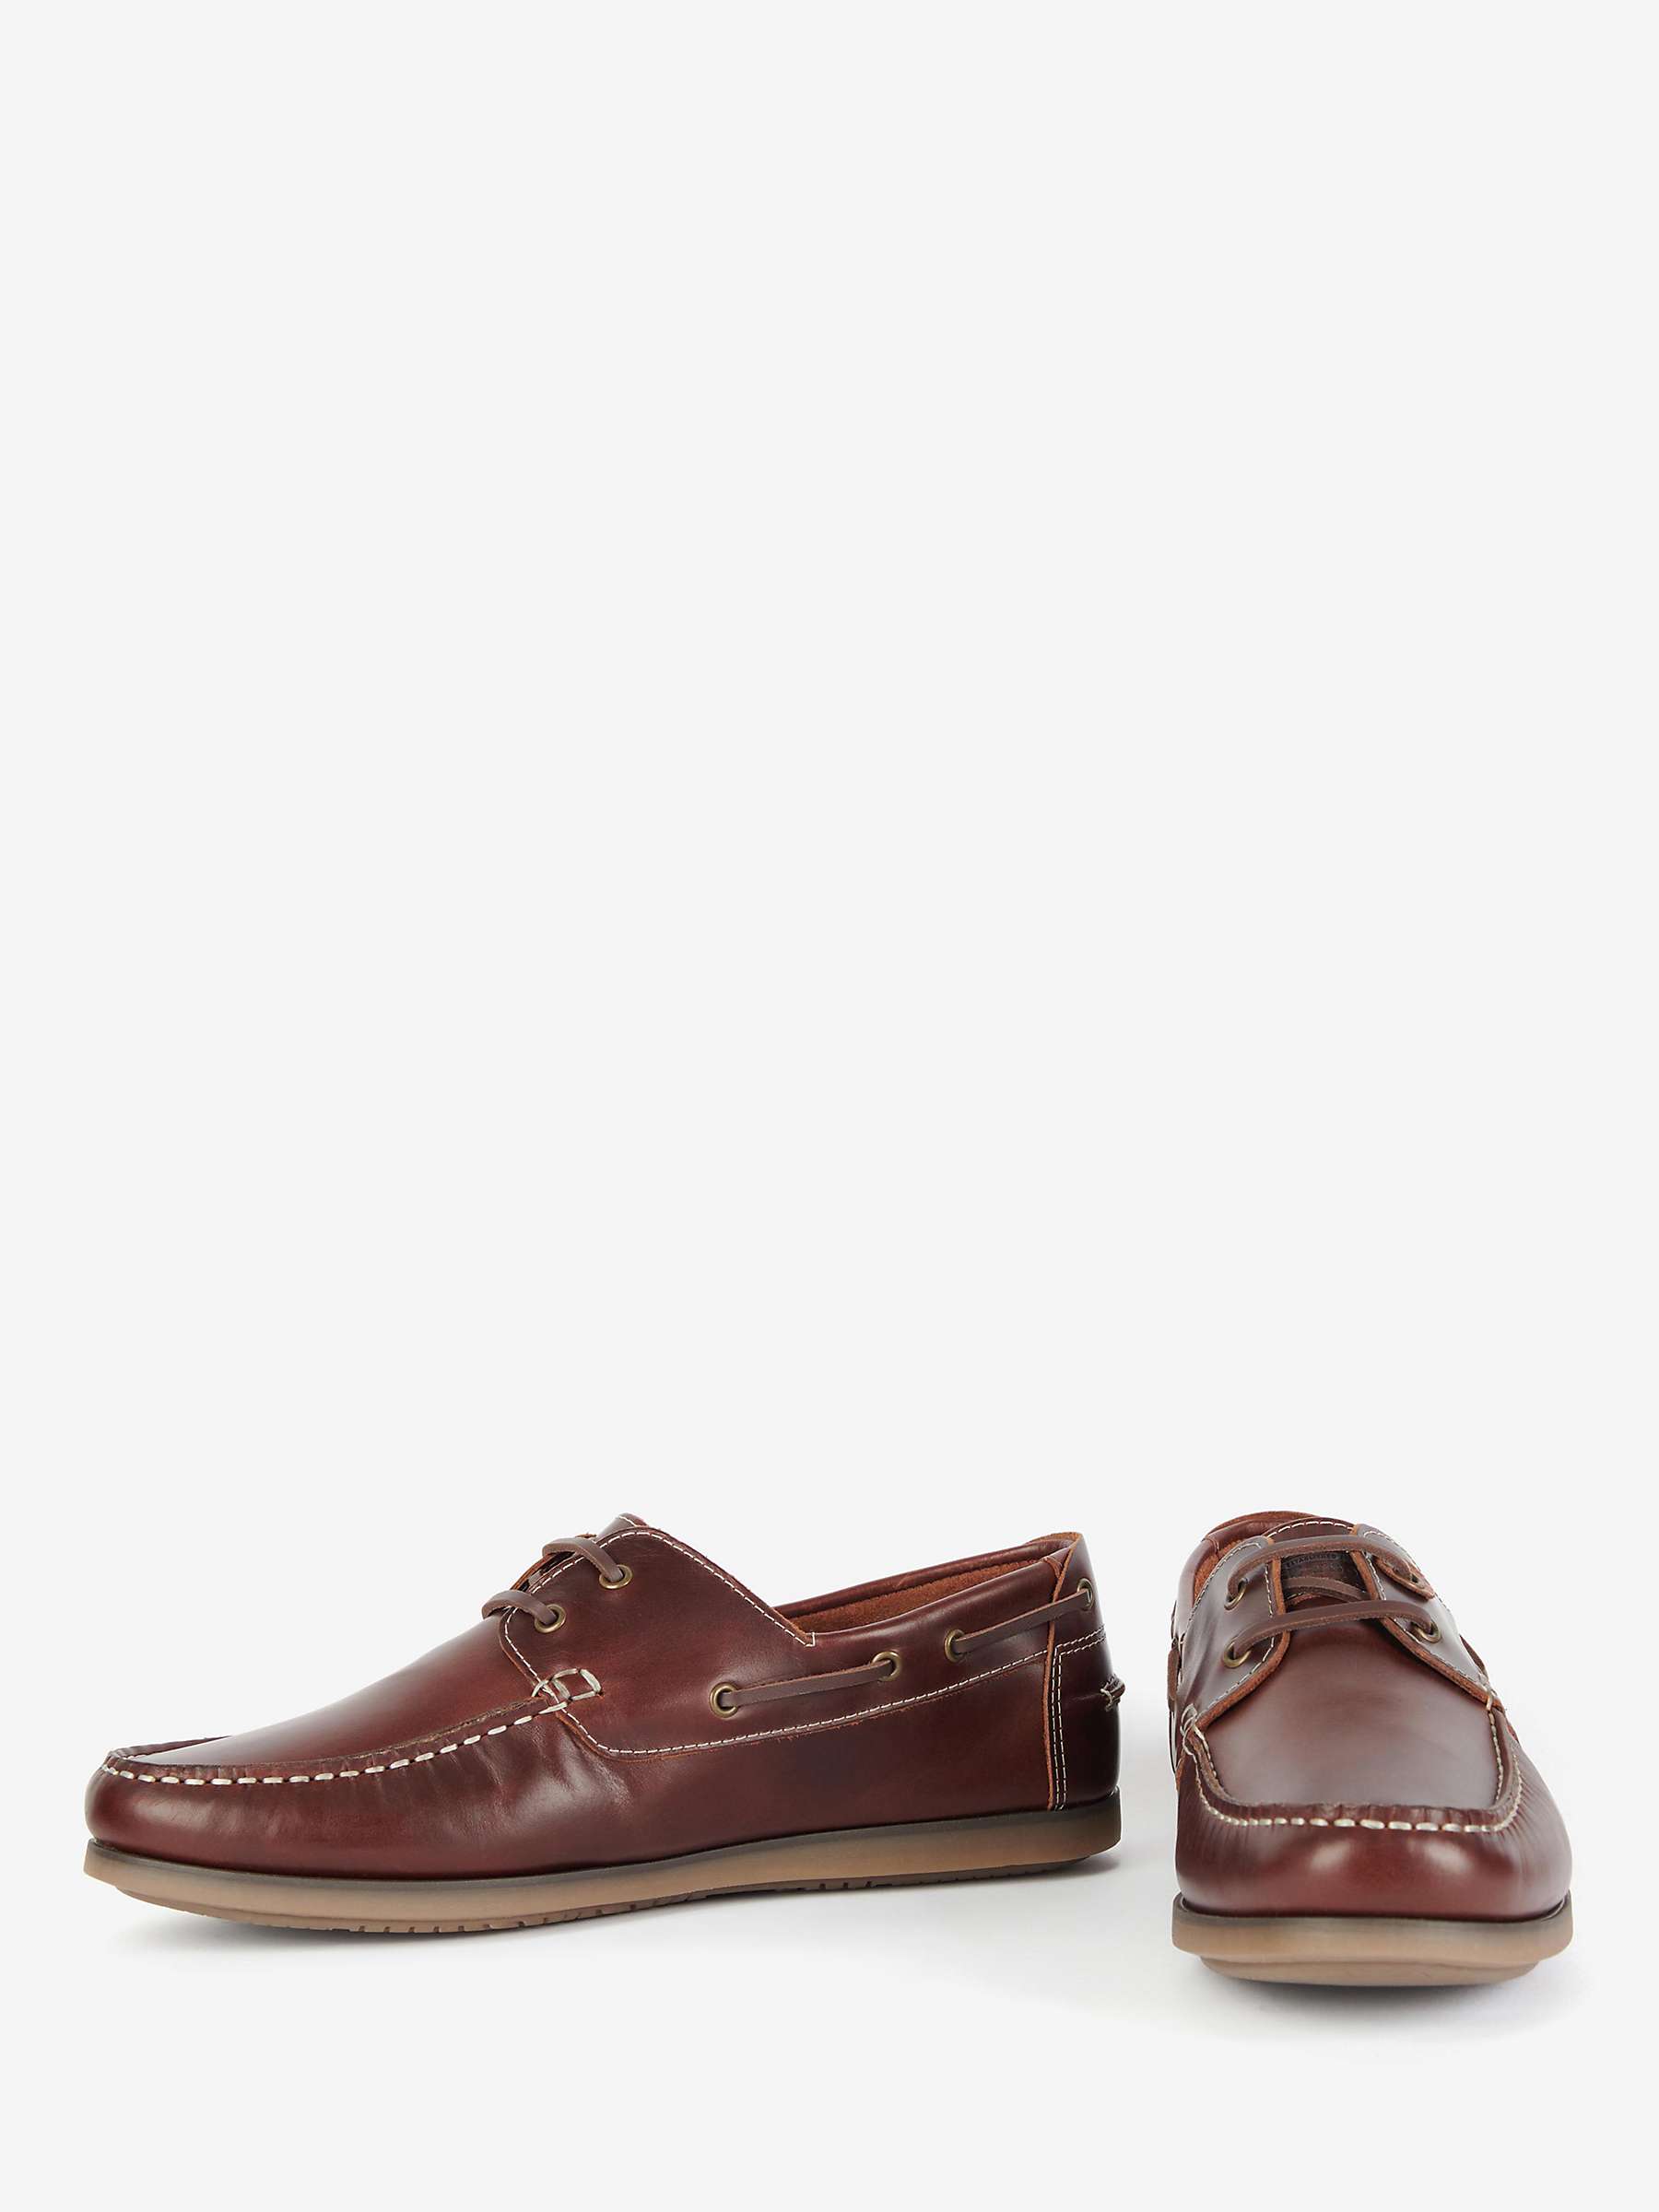 Buy Barbour Wake Leather Boat Shoes Online at johnlewis.com